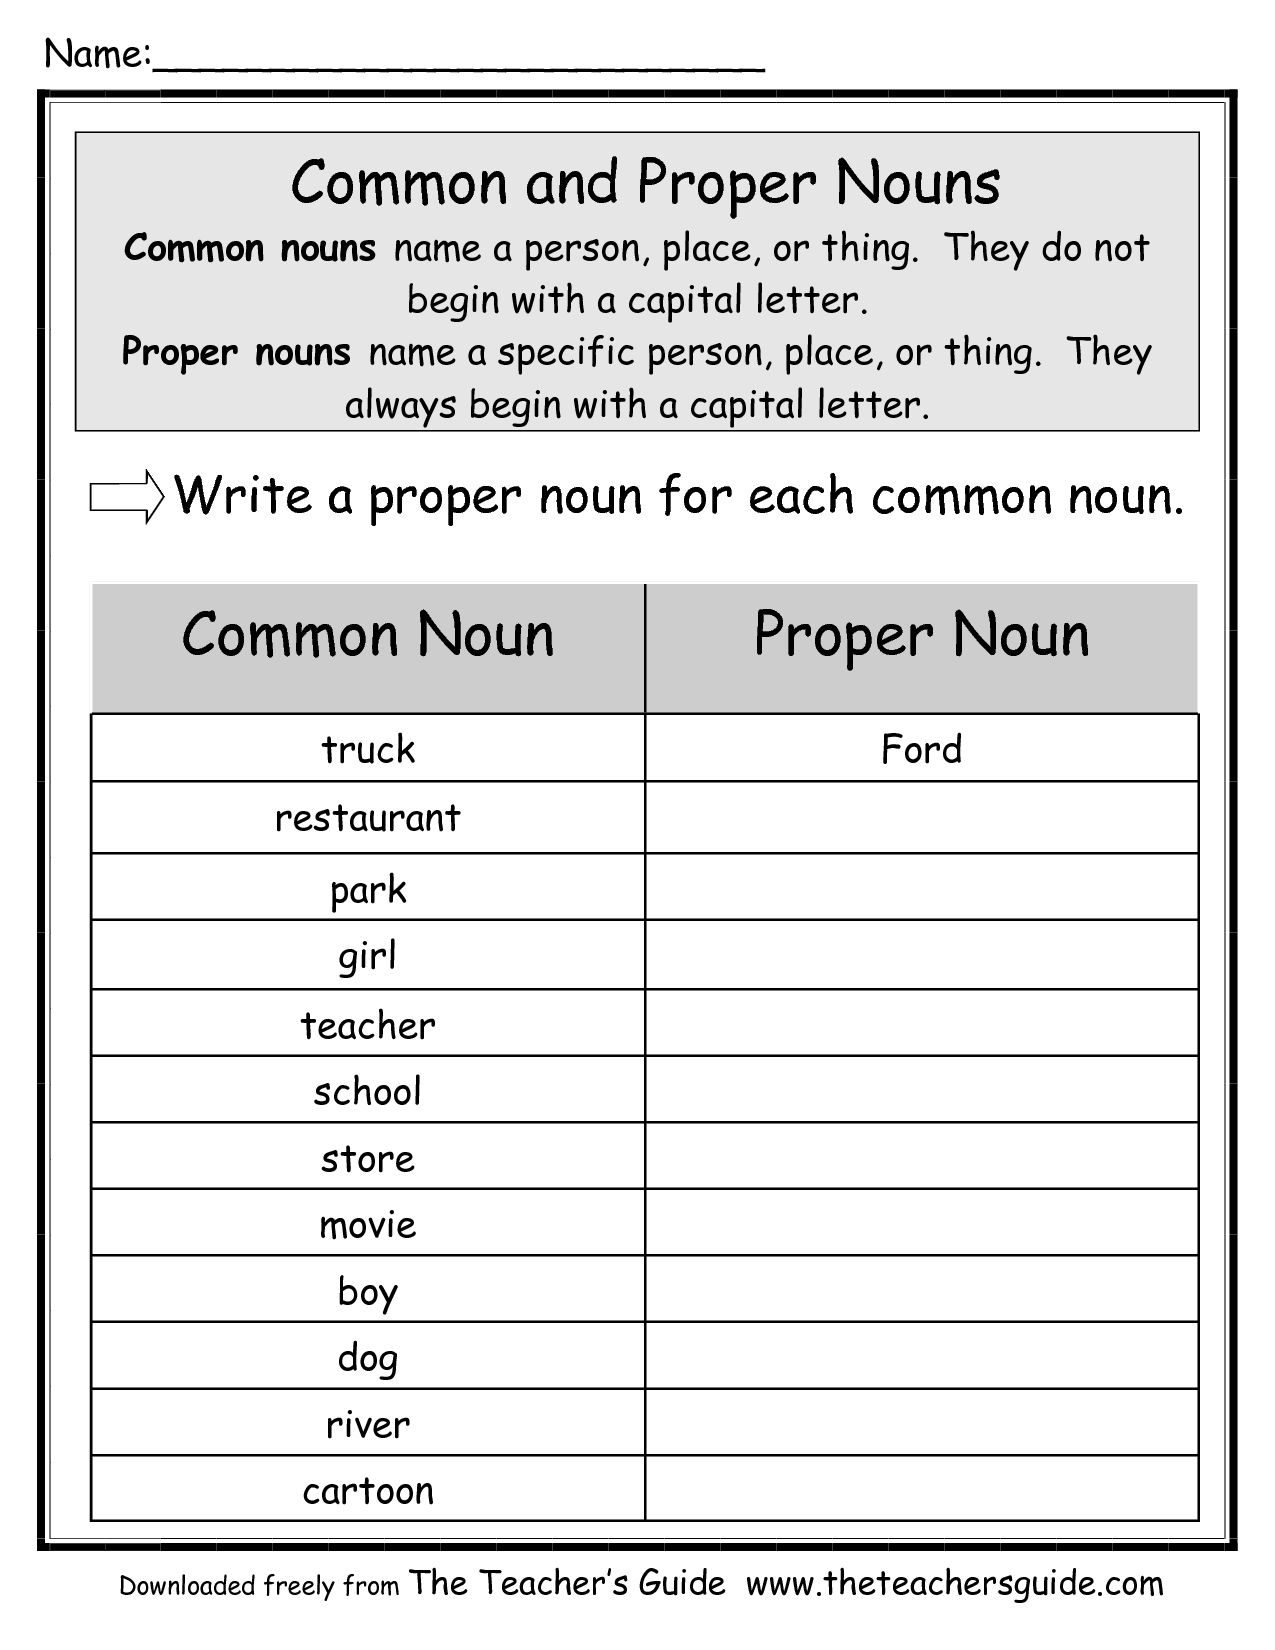 15 Best Images Of Proper Pronouns Worksheets 2nd Grade Pronoun Worksheet Contraction Or